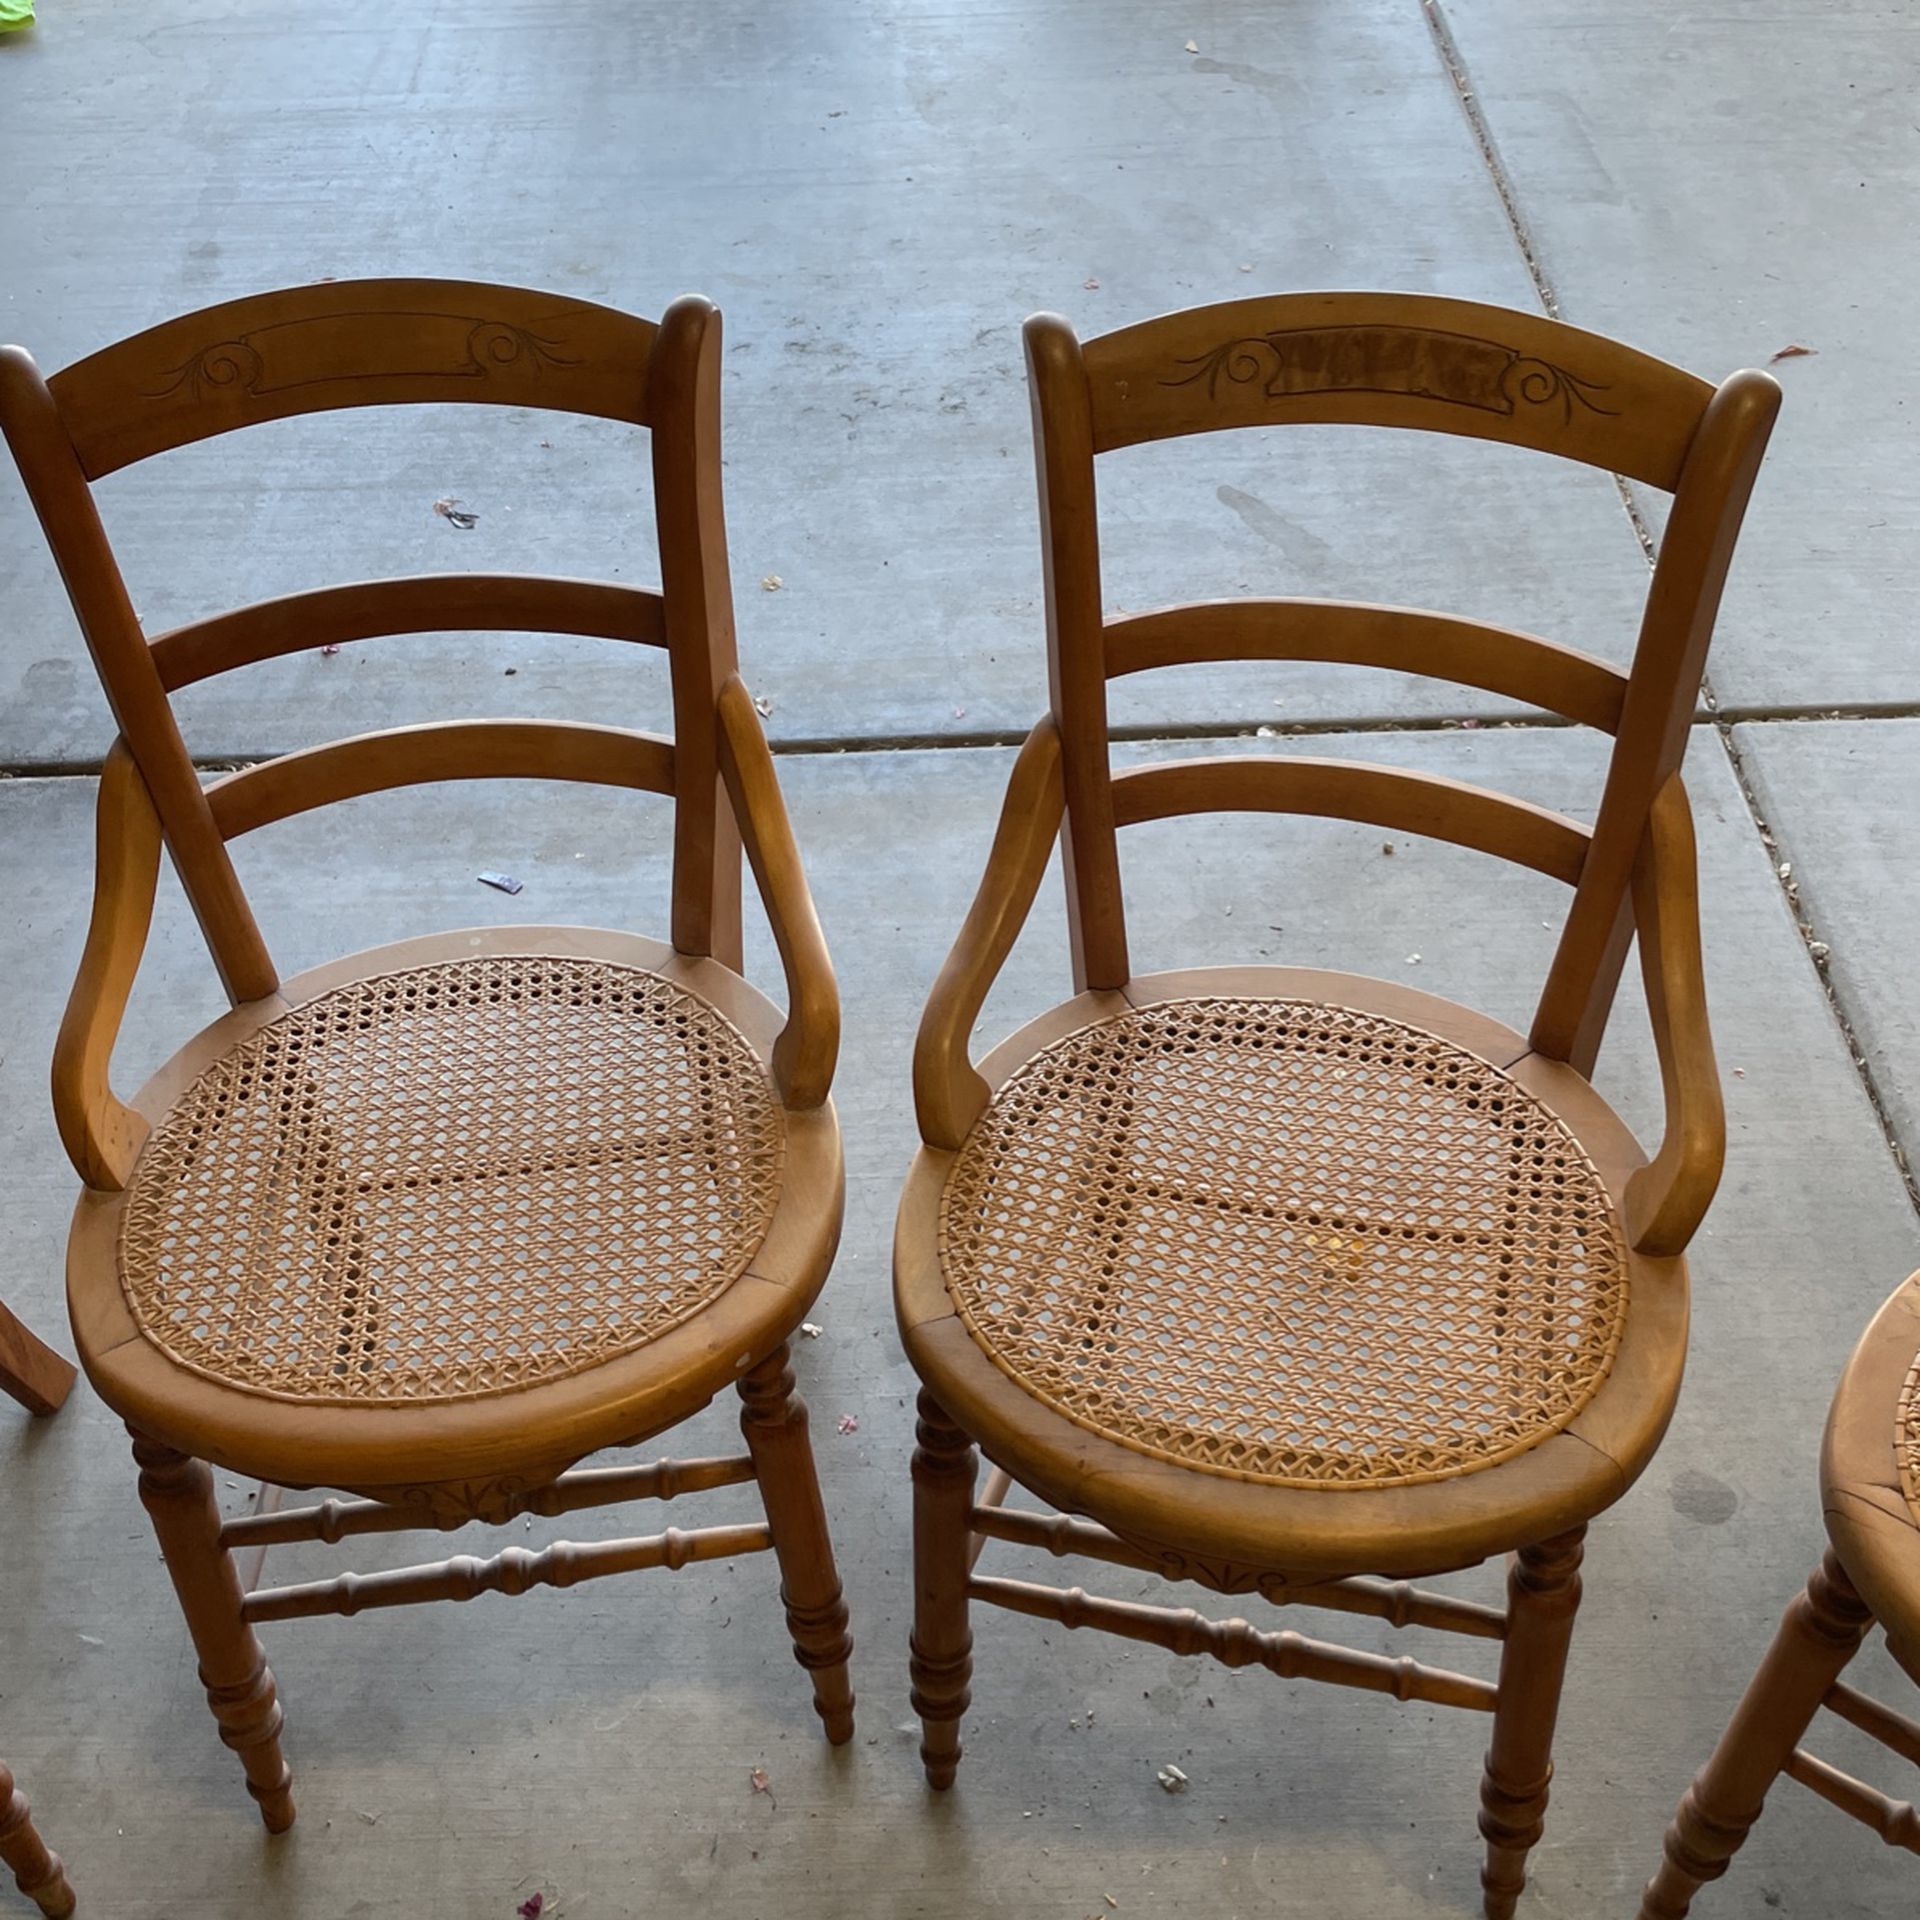 Cane Wicker Chairs 